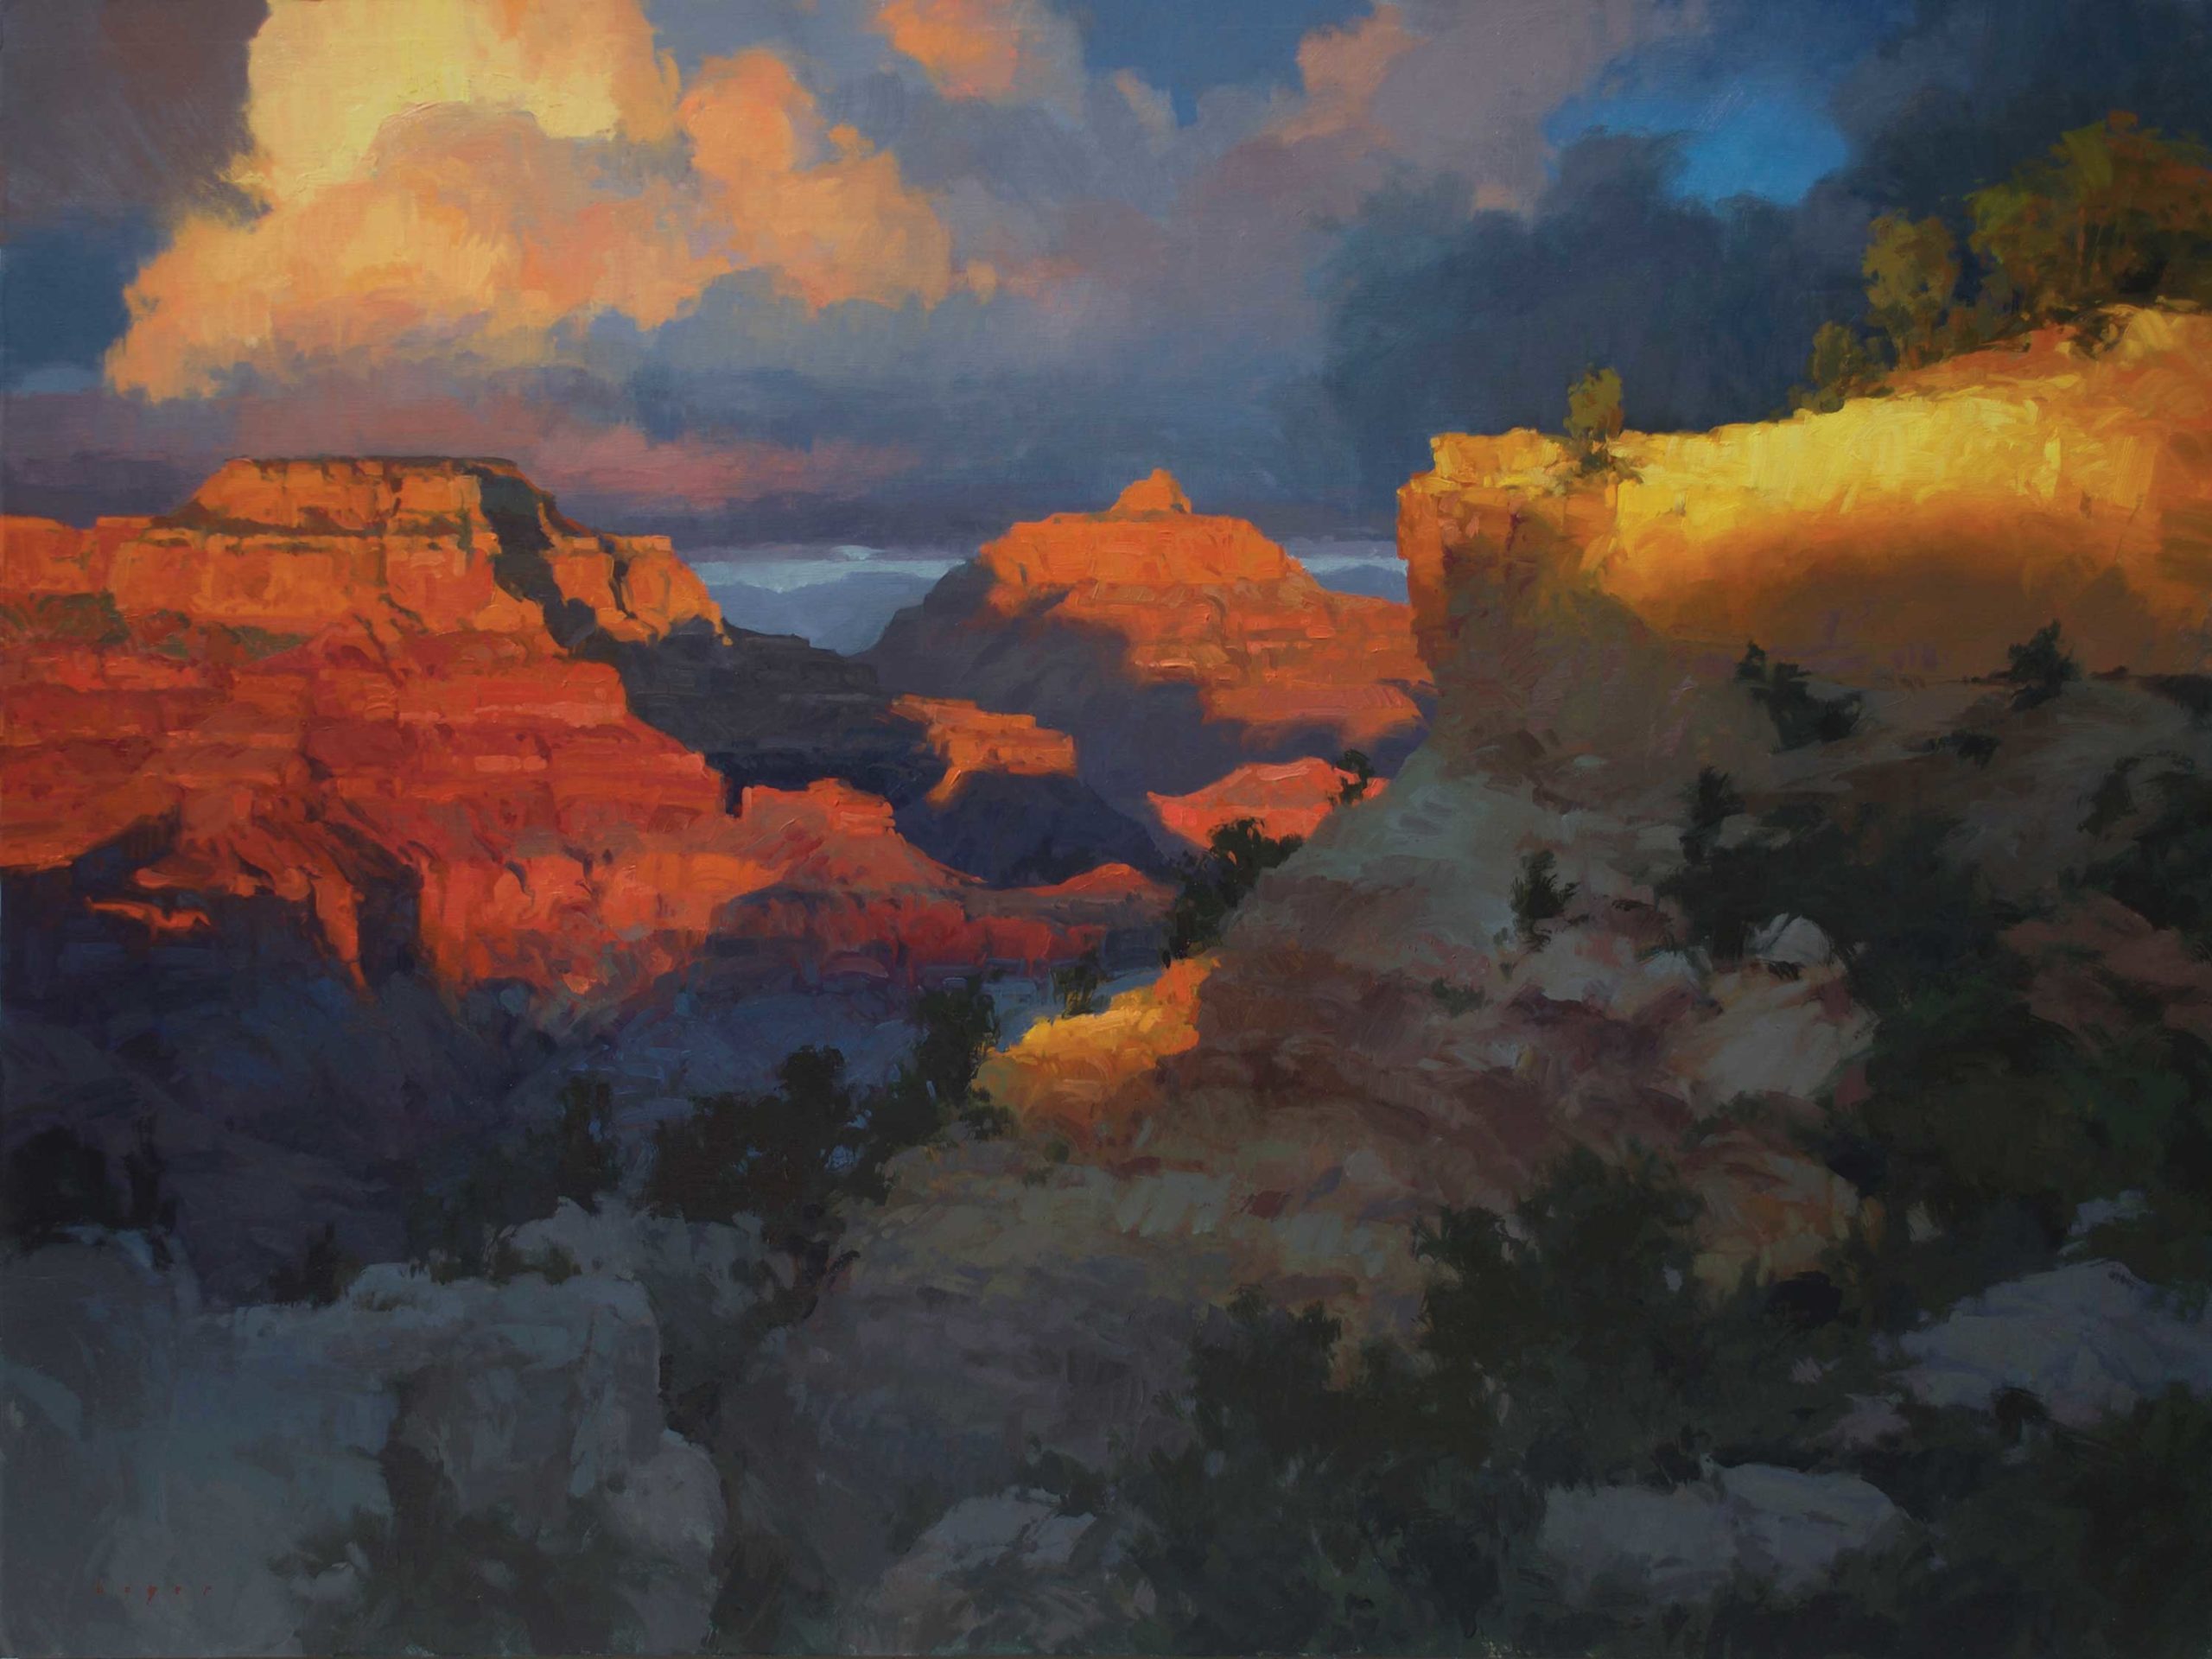 Paintings of National Parks - Grand Canyon